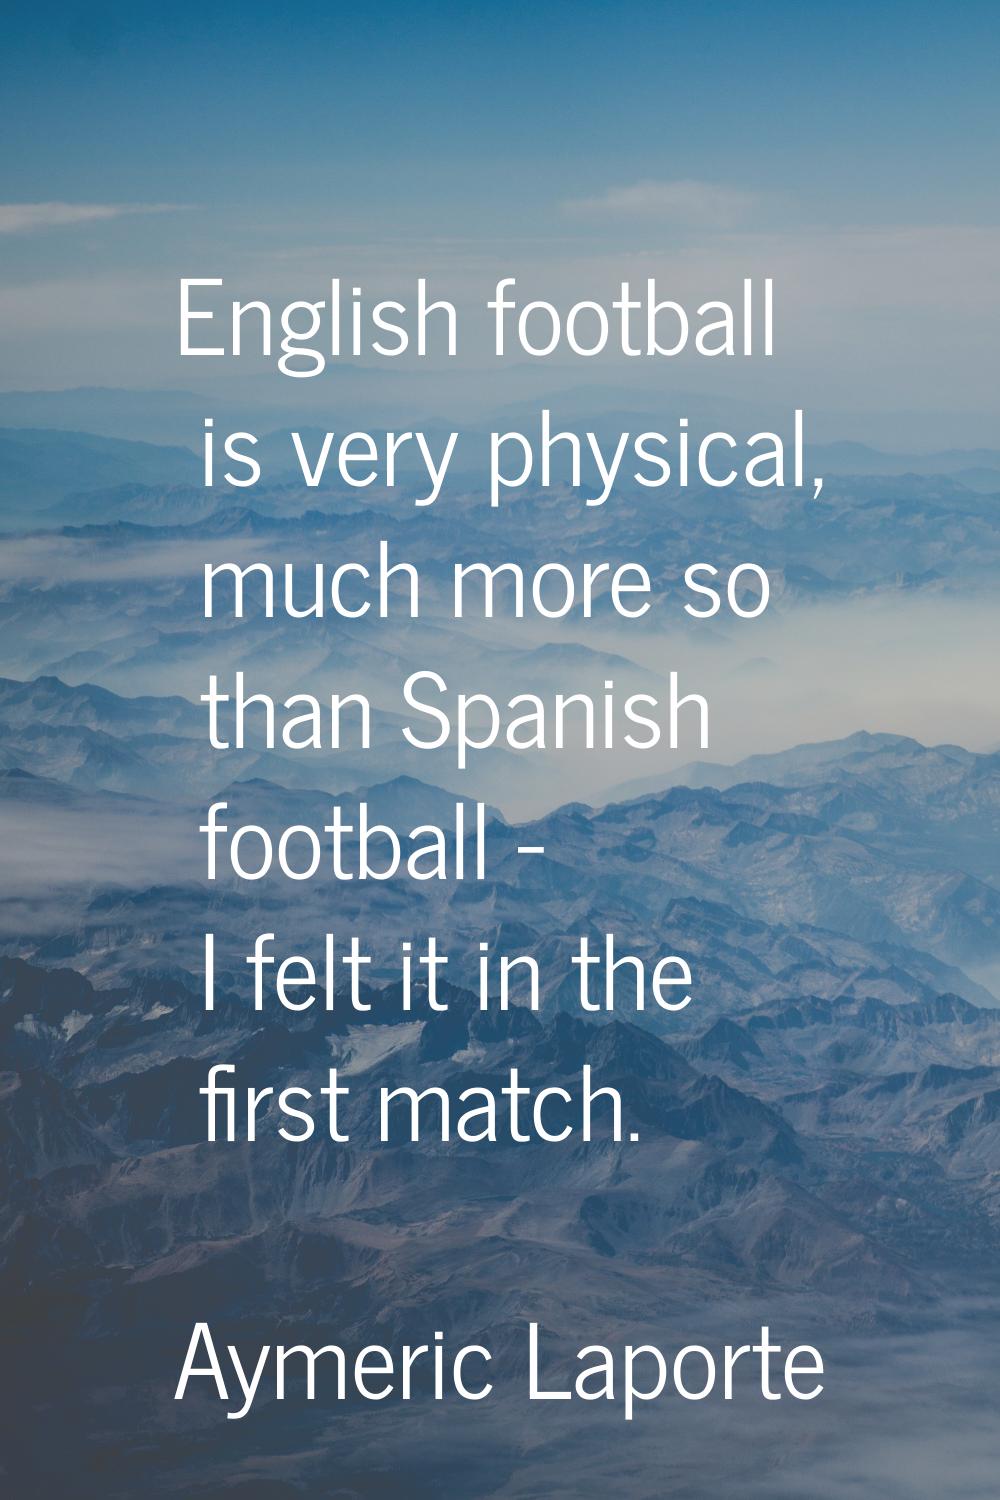 English football is very physical, much more so than Spanish football - I felt it in the first matc